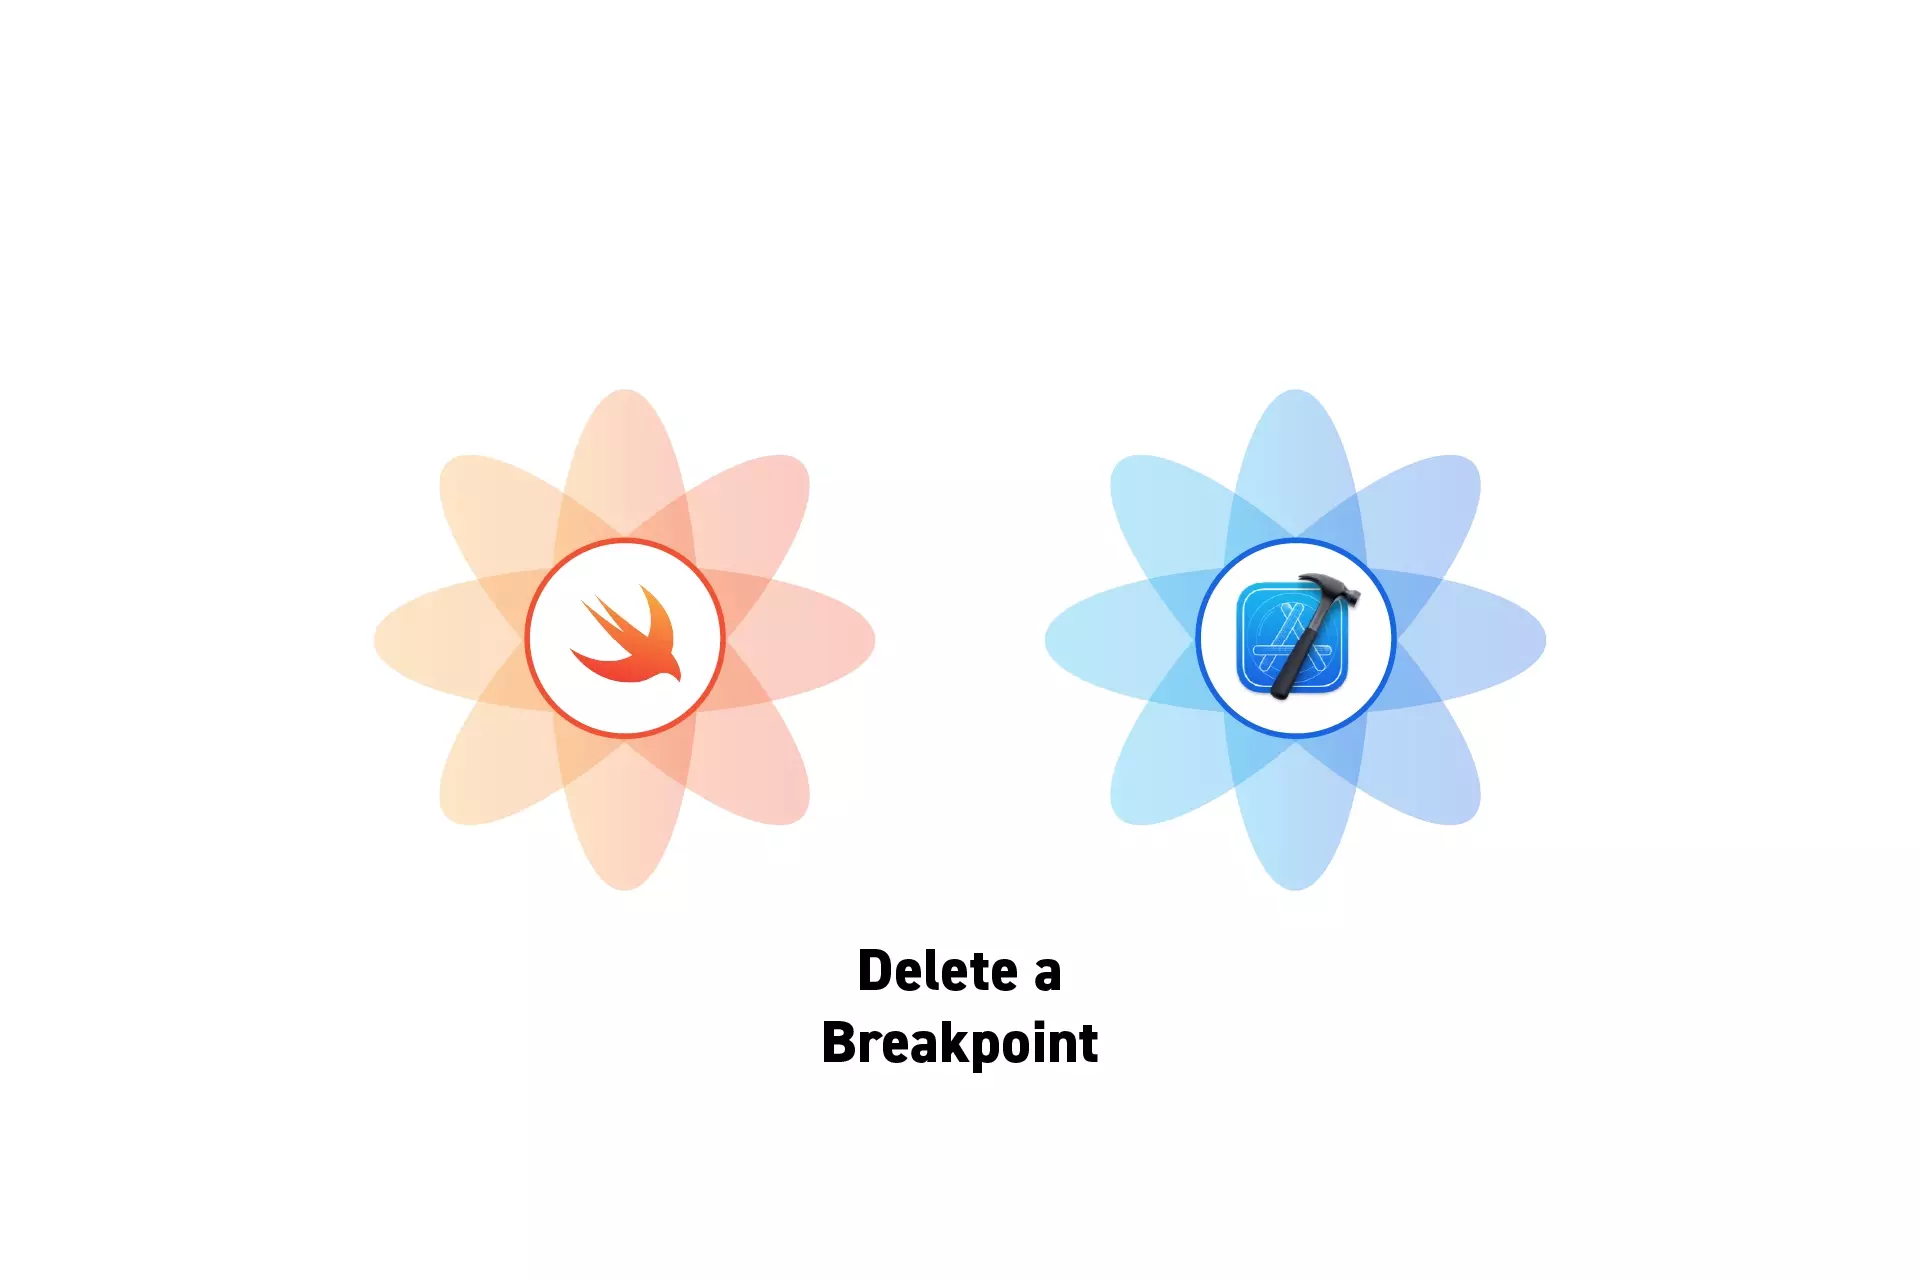 Two flowers that represent Swift and XCode side by side. Beneath them sits the text “Delete a Breakpoint”.